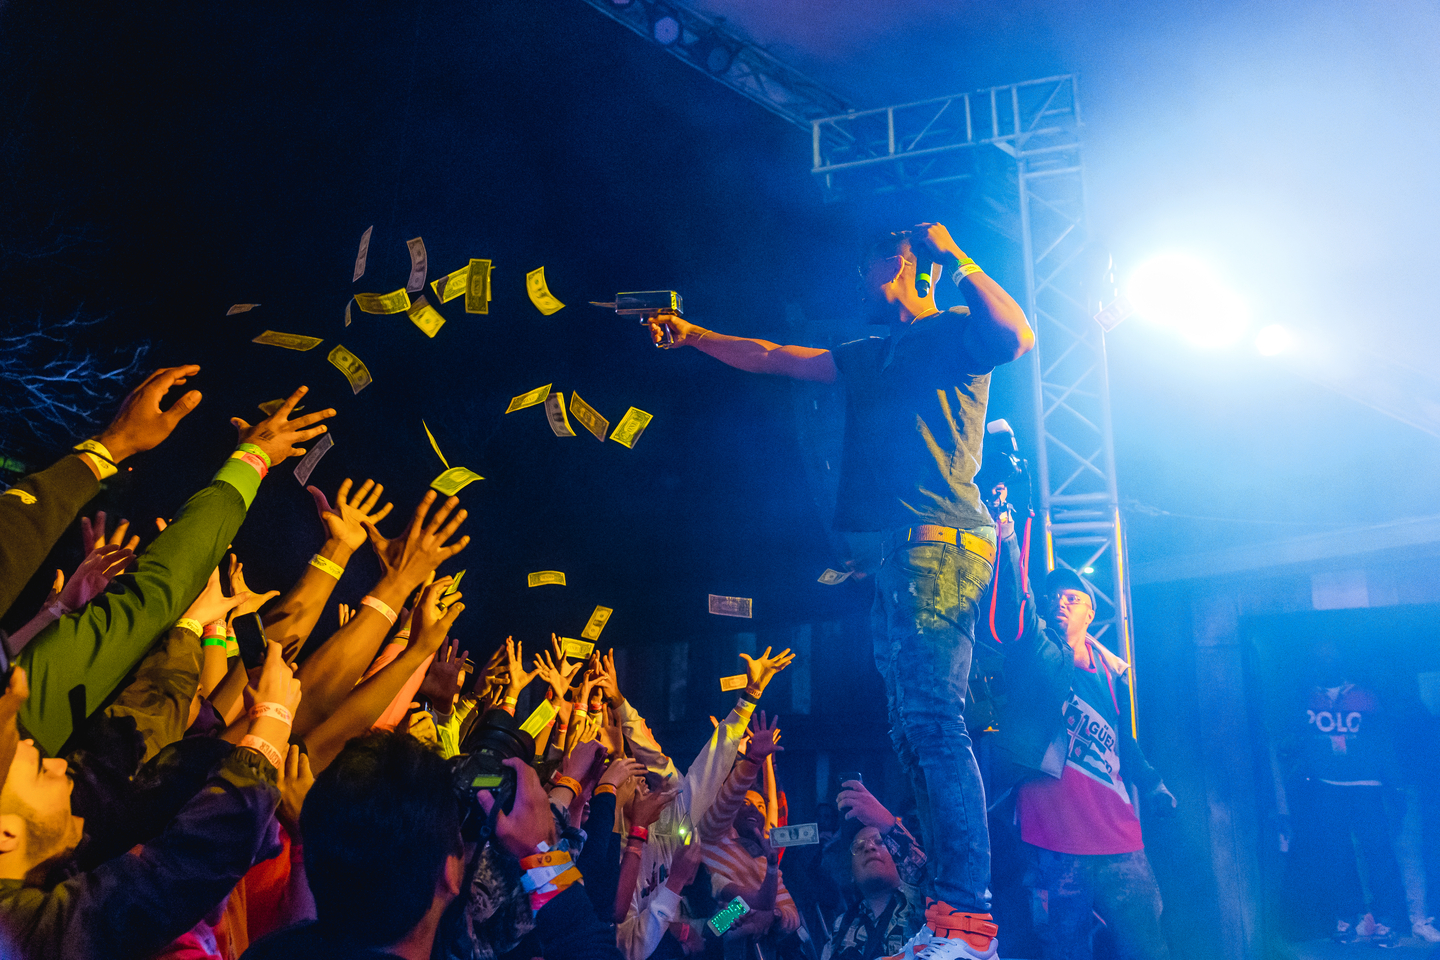 Cap Gold at Stubb's, presented by DNES Marketing – Photo by Levi Thompson